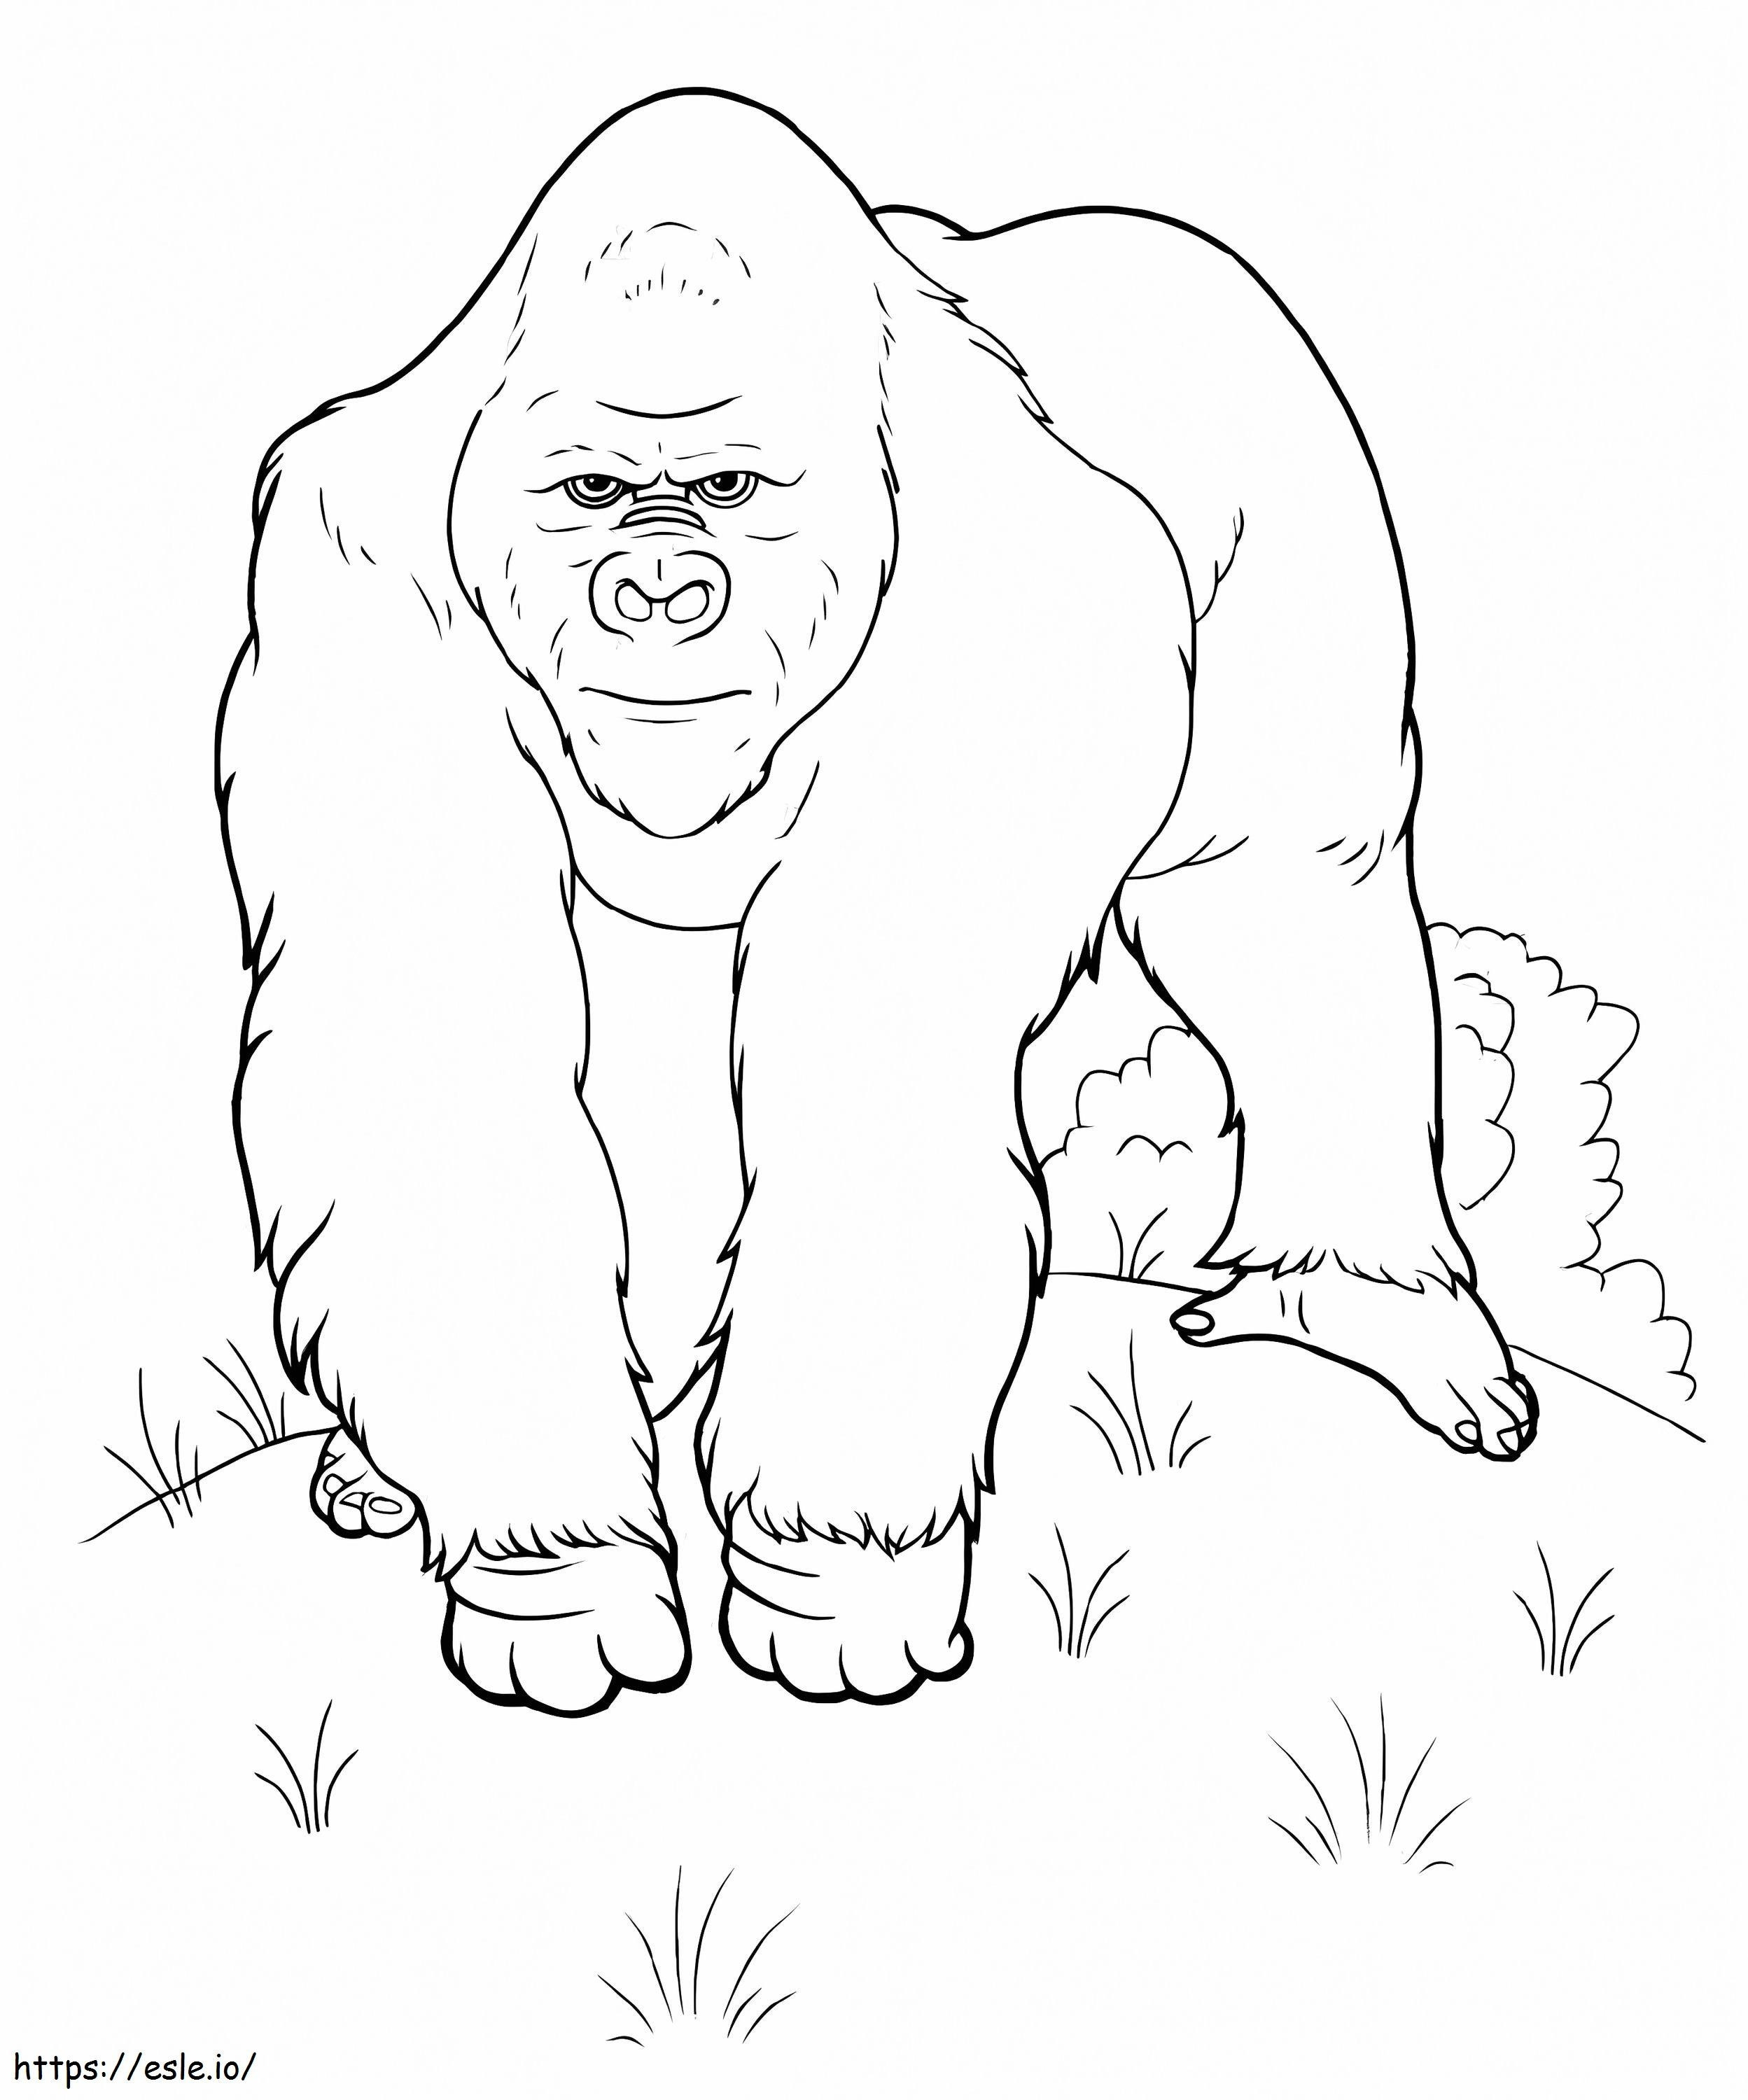 Awesome Gorilla coloring page